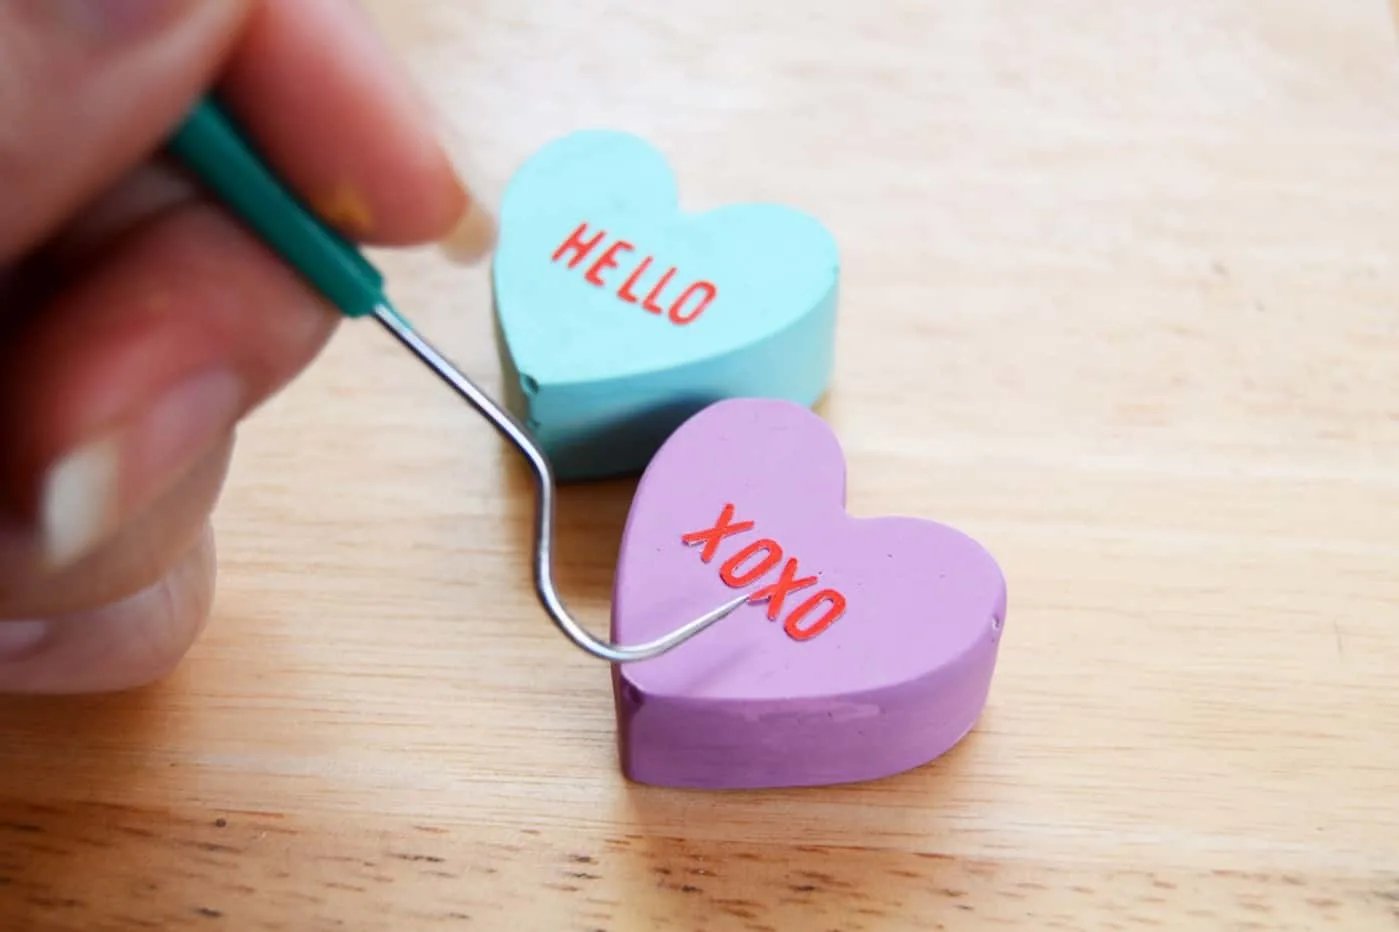 Conversation Heart Valentine's Day Magnets - DIY Candy